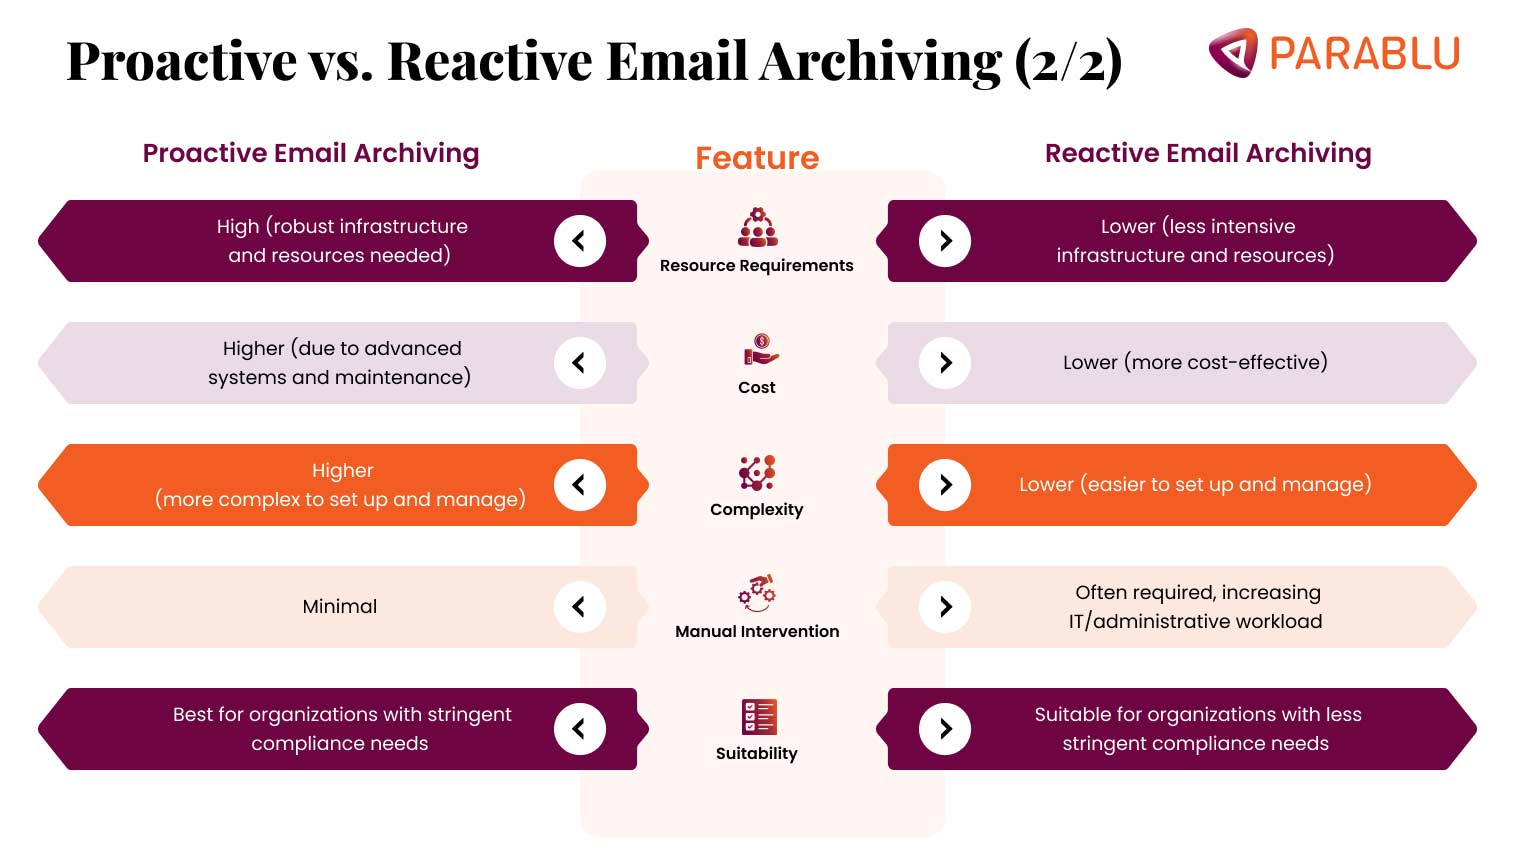 Proactive and Reactive Email Archiving 2